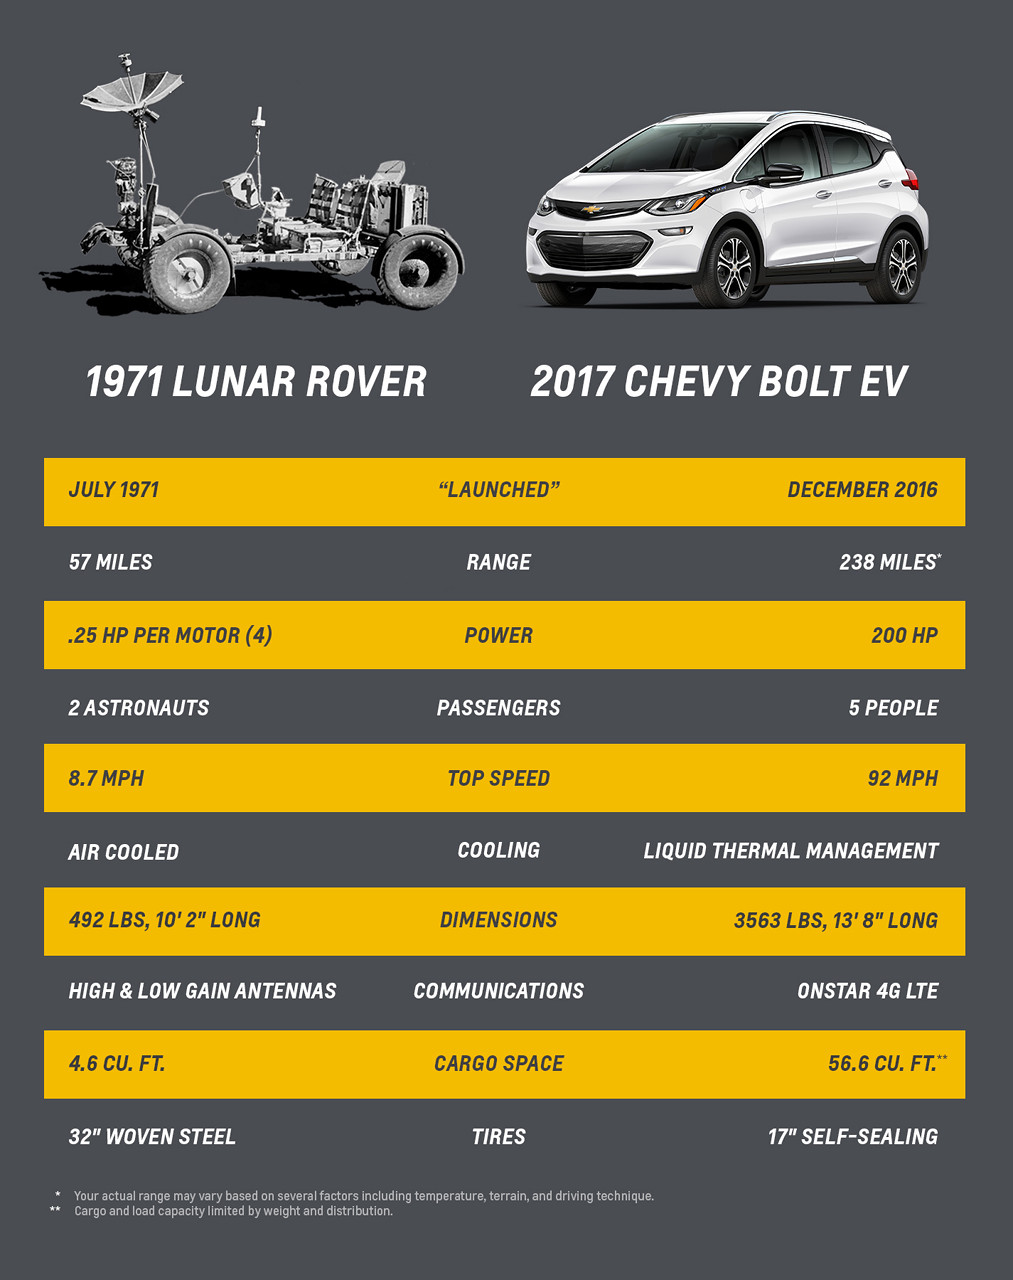 Side-by-side comparison of the 1971 Lunar Rover and 2017 Chevy Bolt EV.